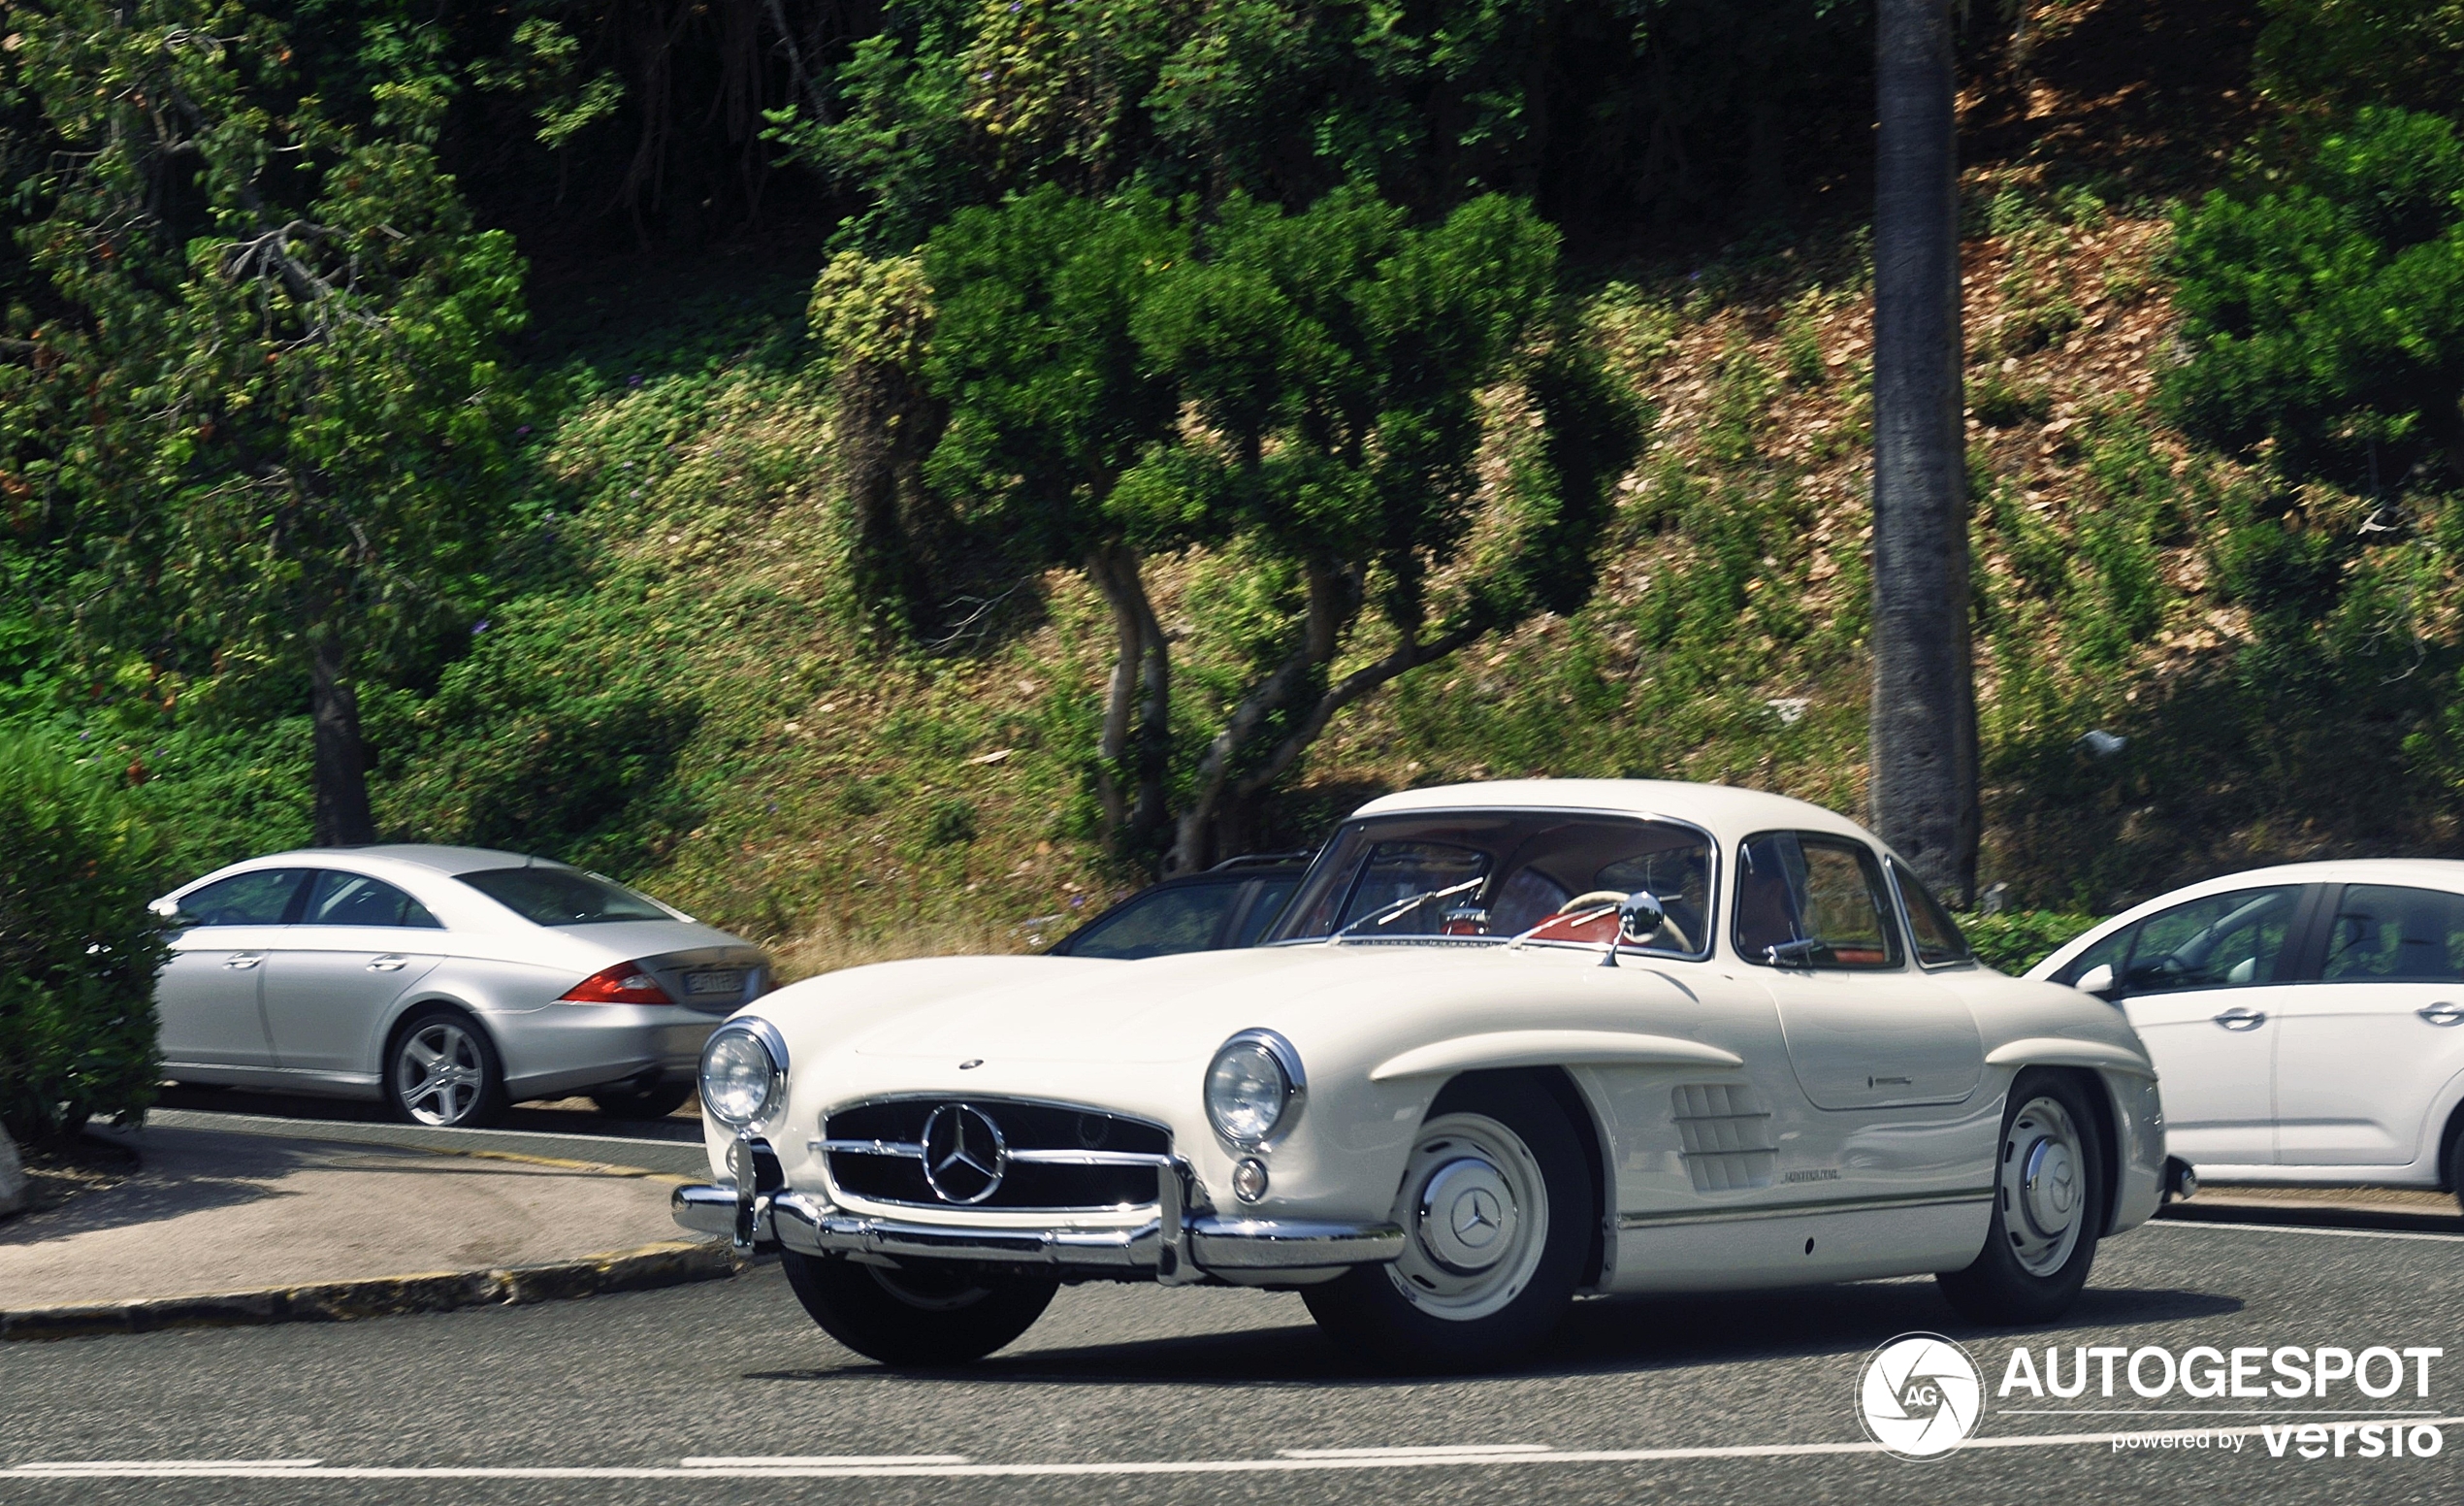 The legendary 300 SL emerges in the South of France.